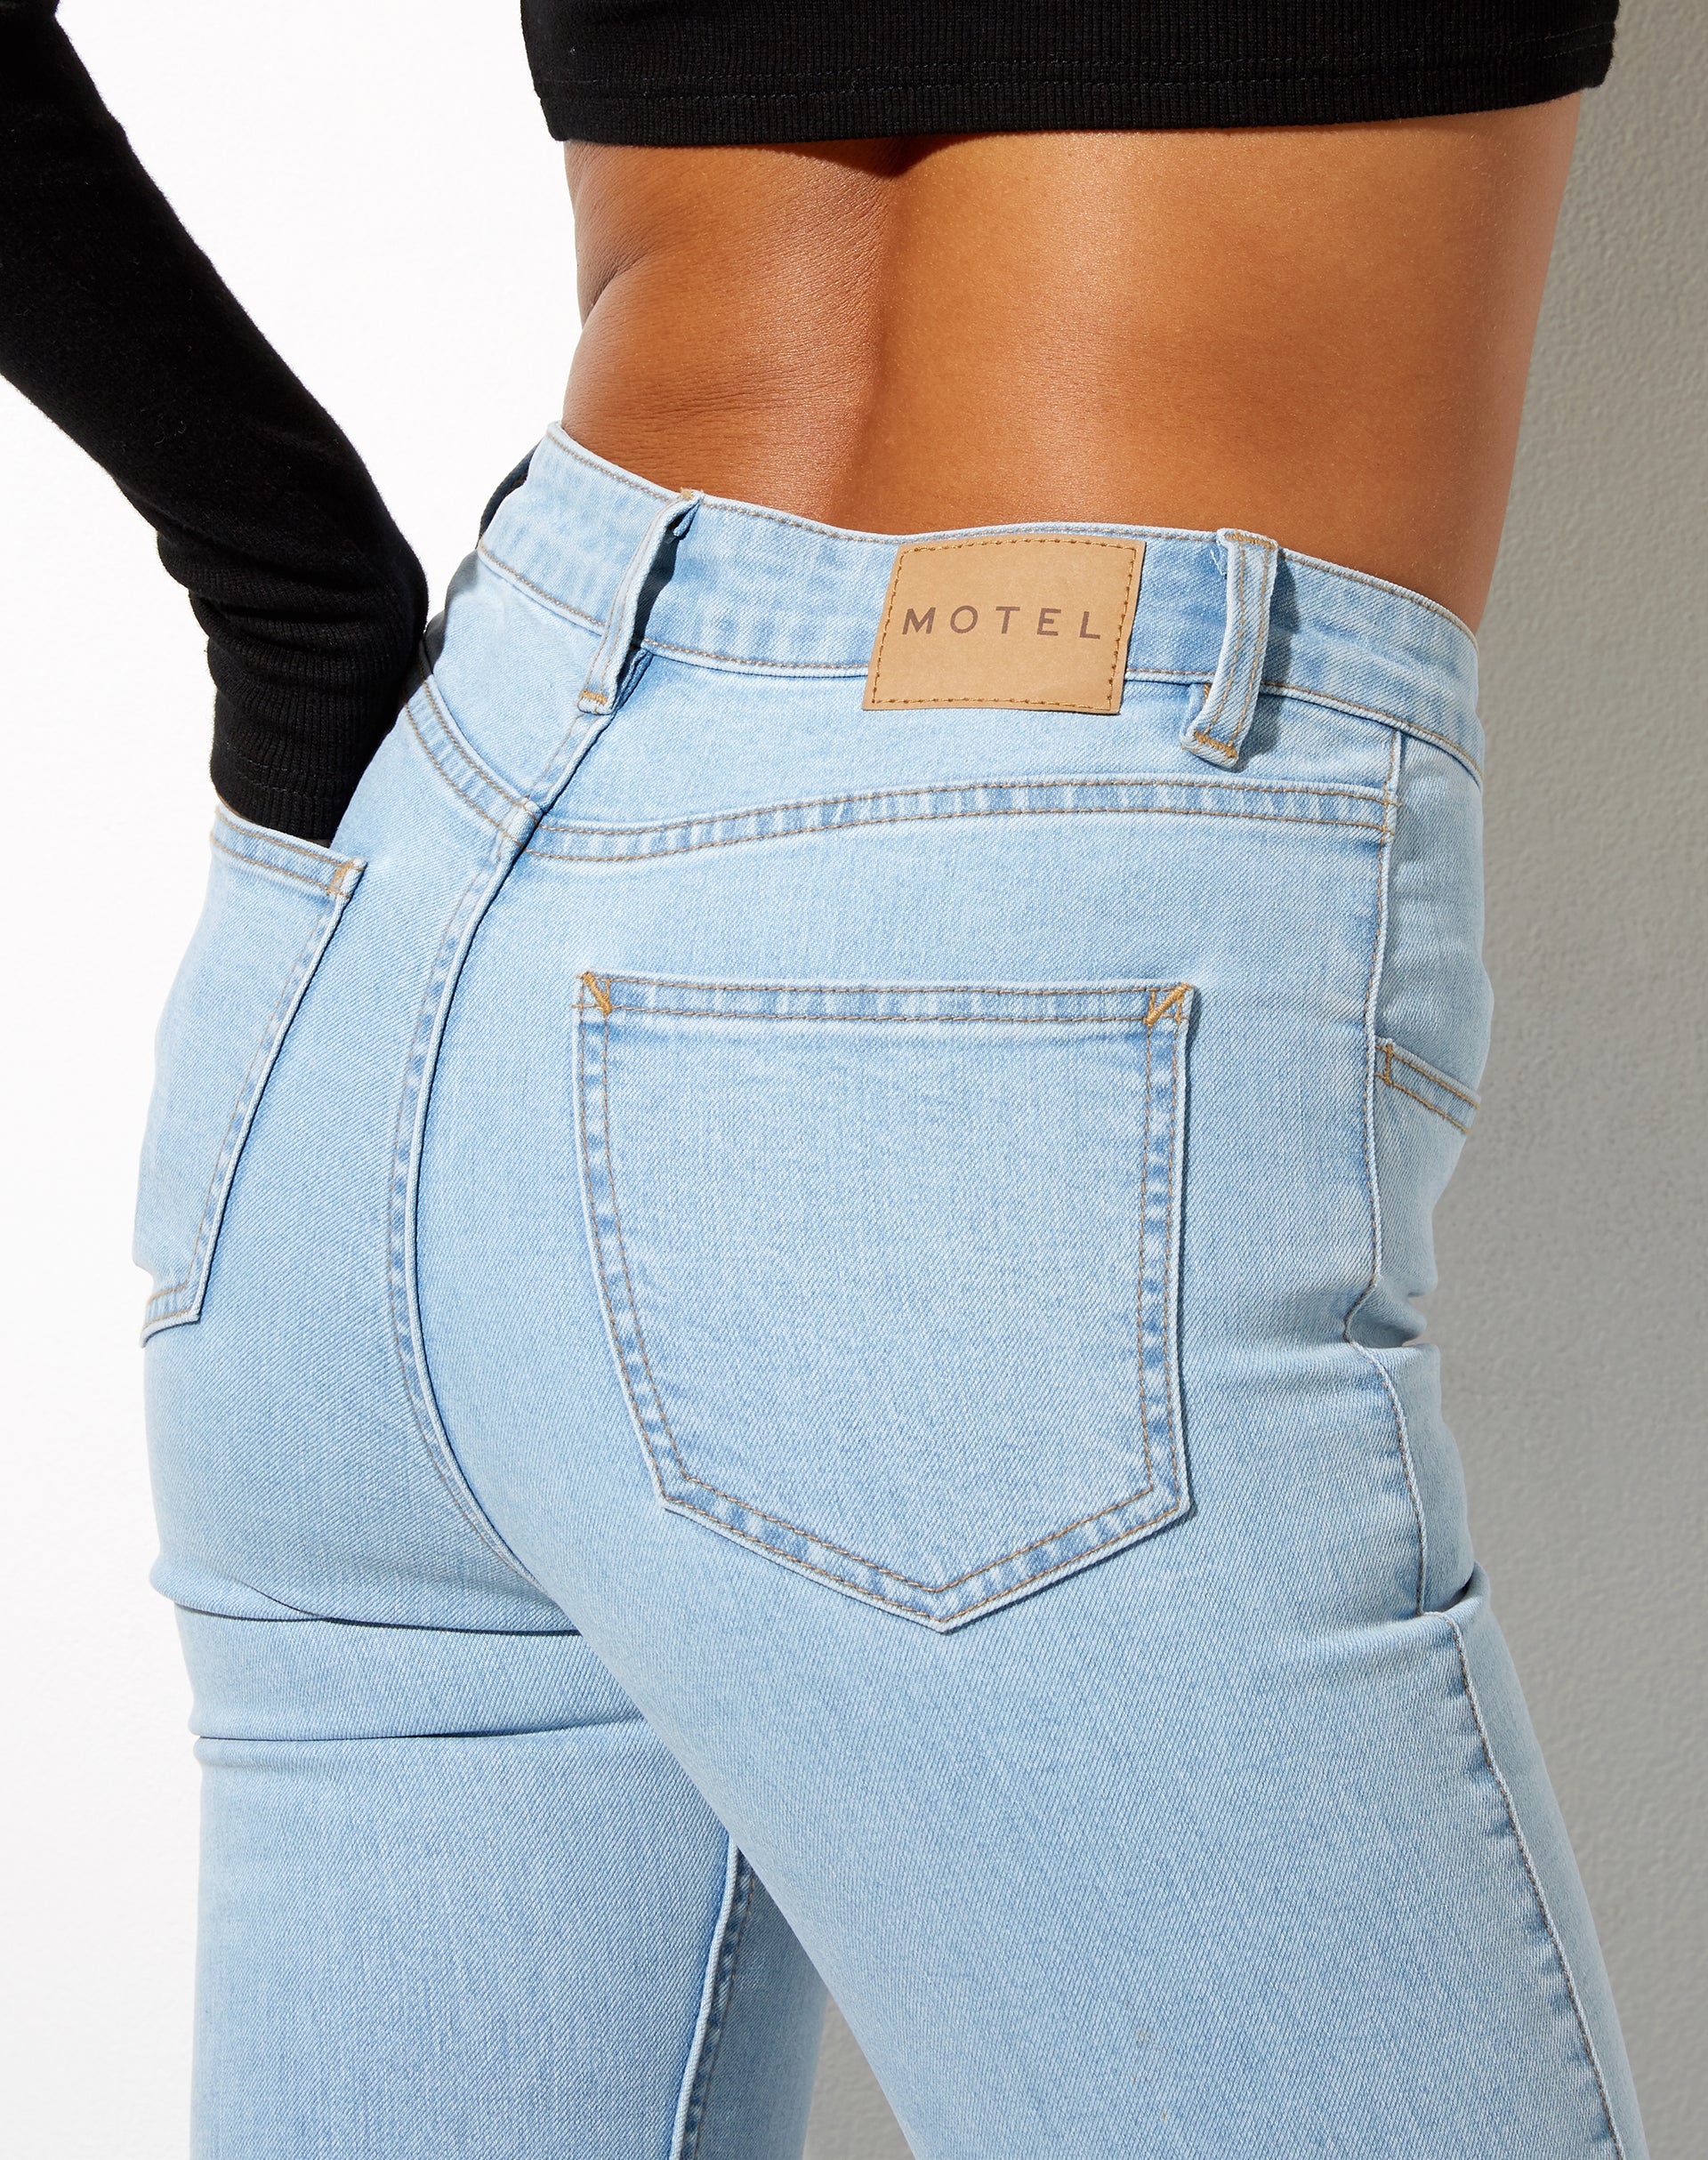 Image of Seam Flare Jeans in Light Wash